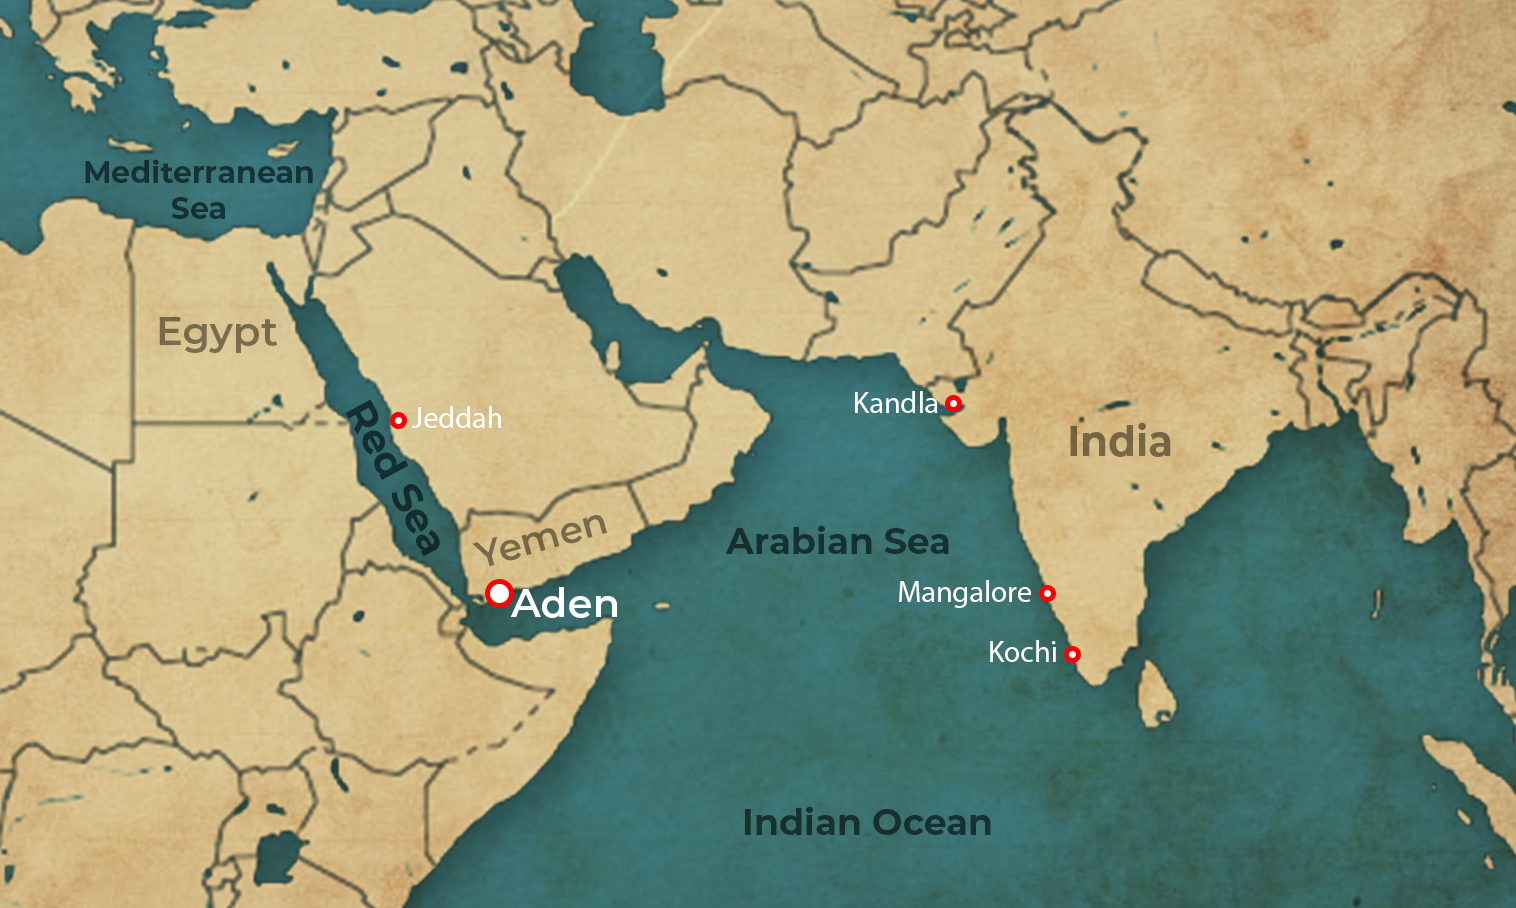 Aden is located smack opposite the Mangalore port in India